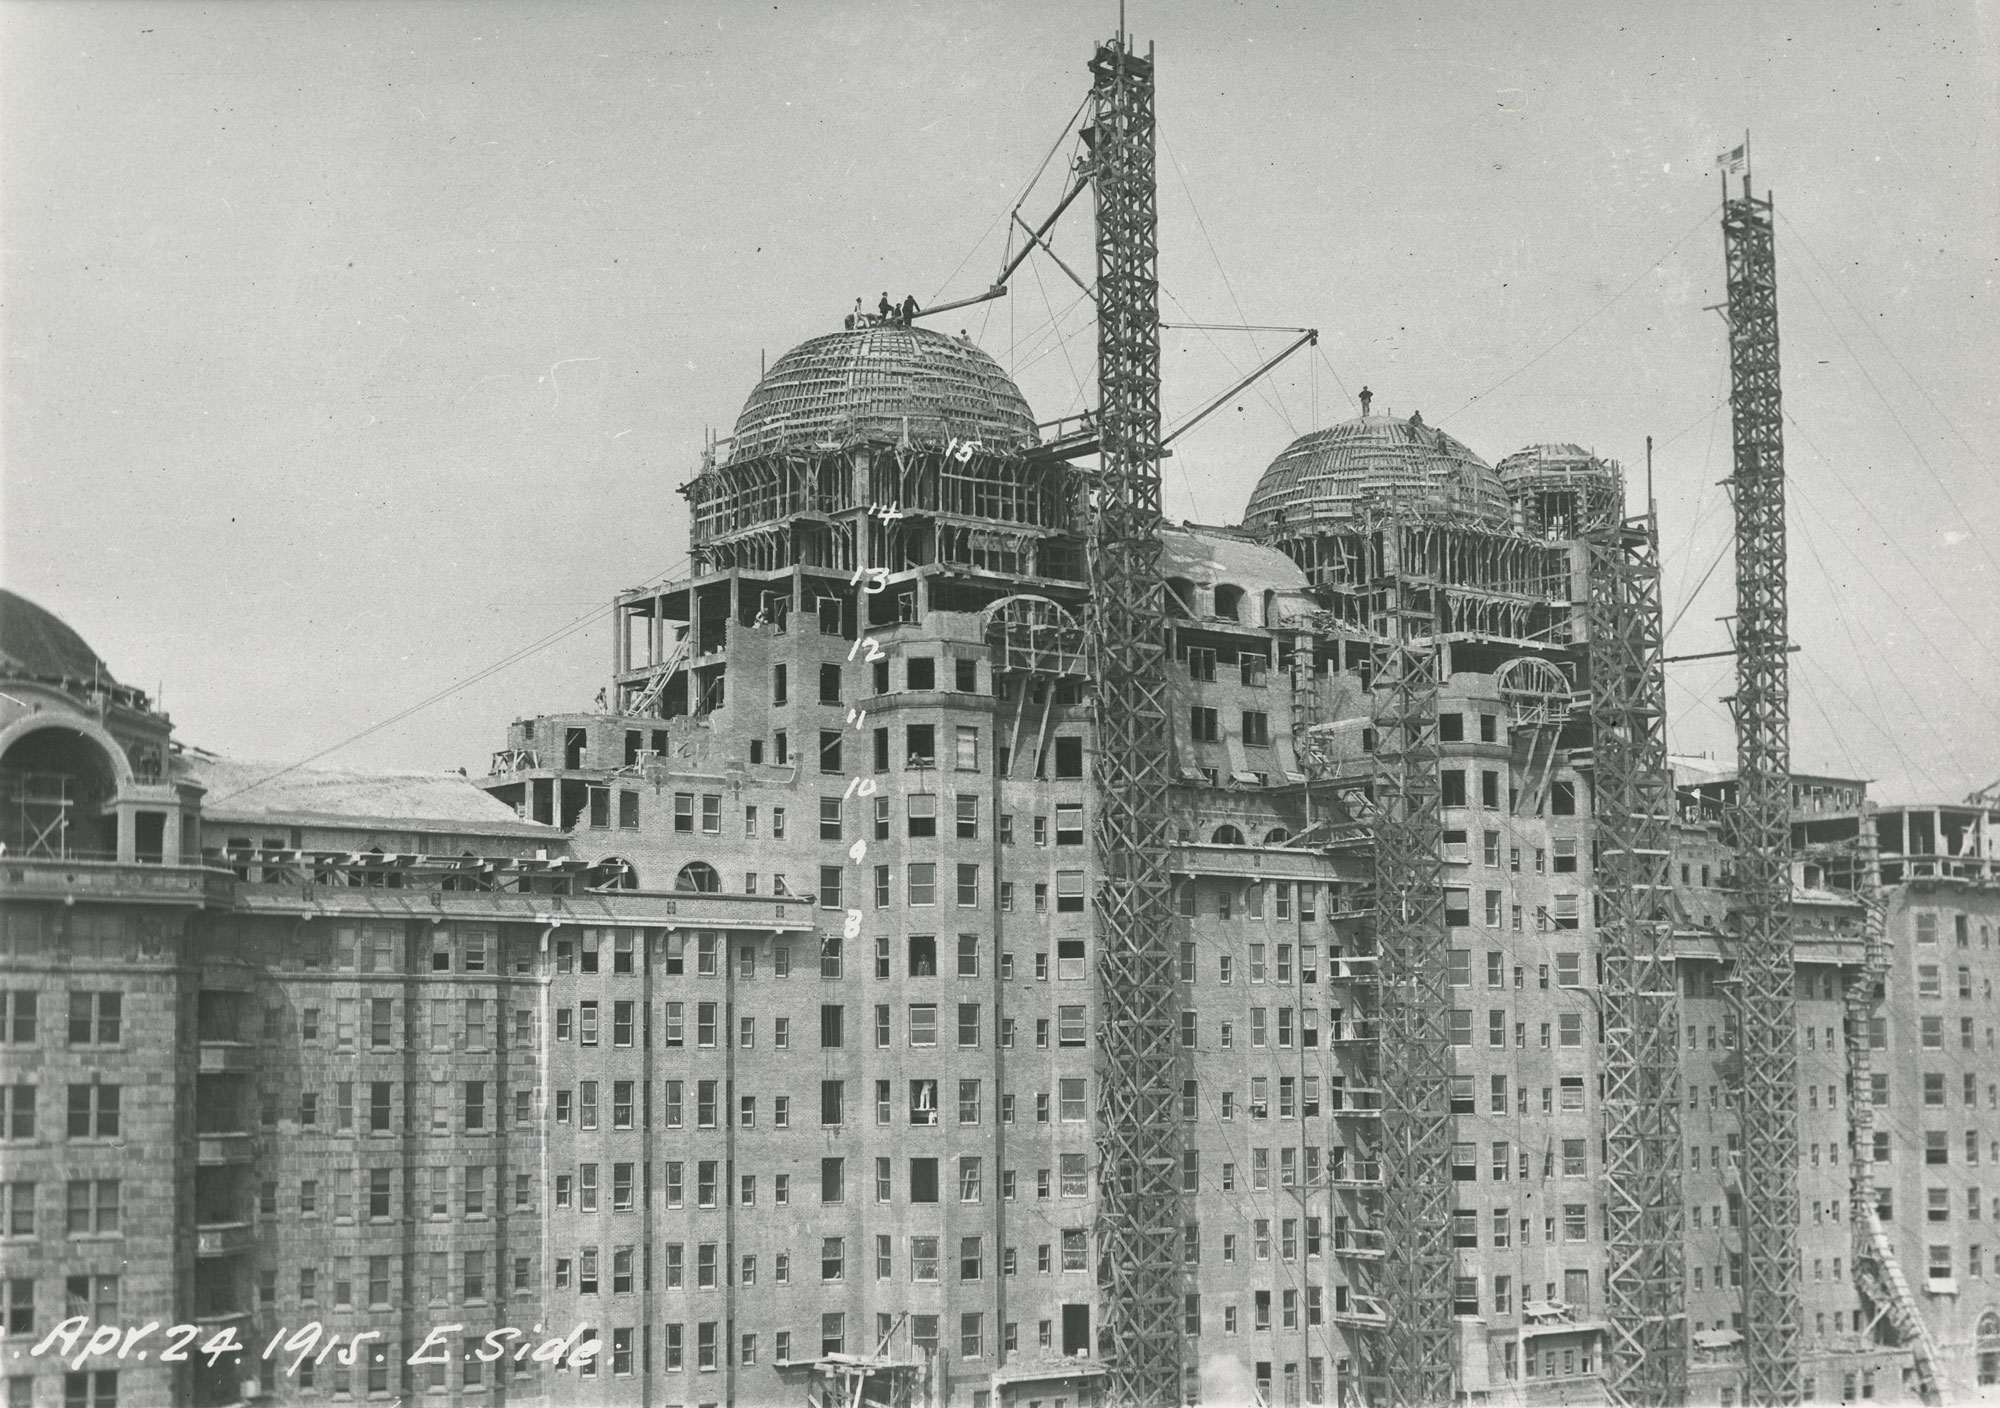 Black and white photograph showing scaffolding on Traymore Hotel, and cranes installing domed roofs